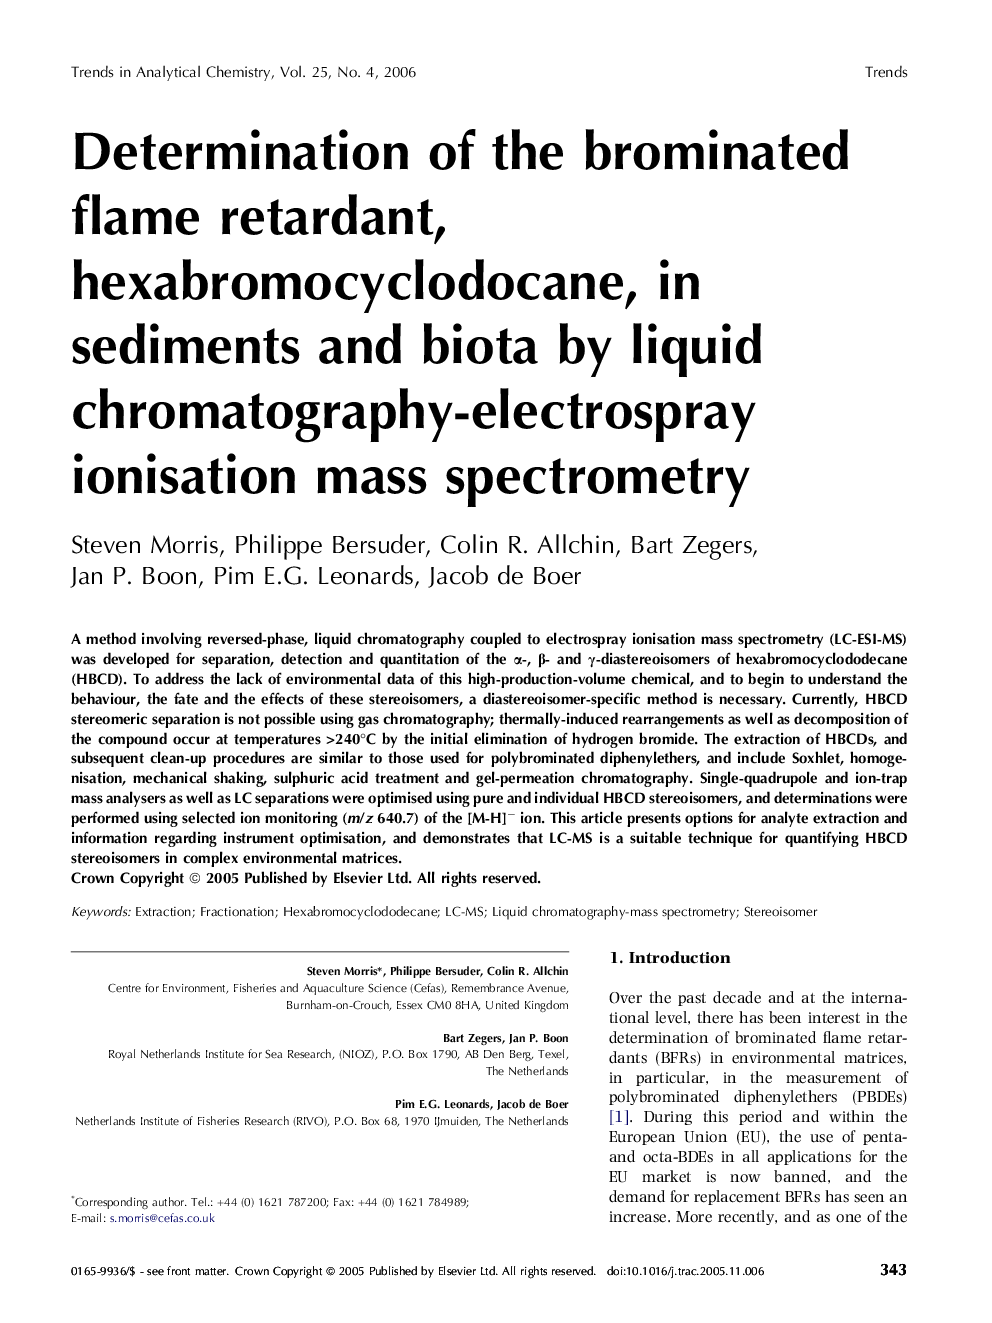 Determination of the brominated flame retardant, hexabromocyclodocane, in sediments and biota by liquid chromatography-electrospray ionisation mass spectrometry